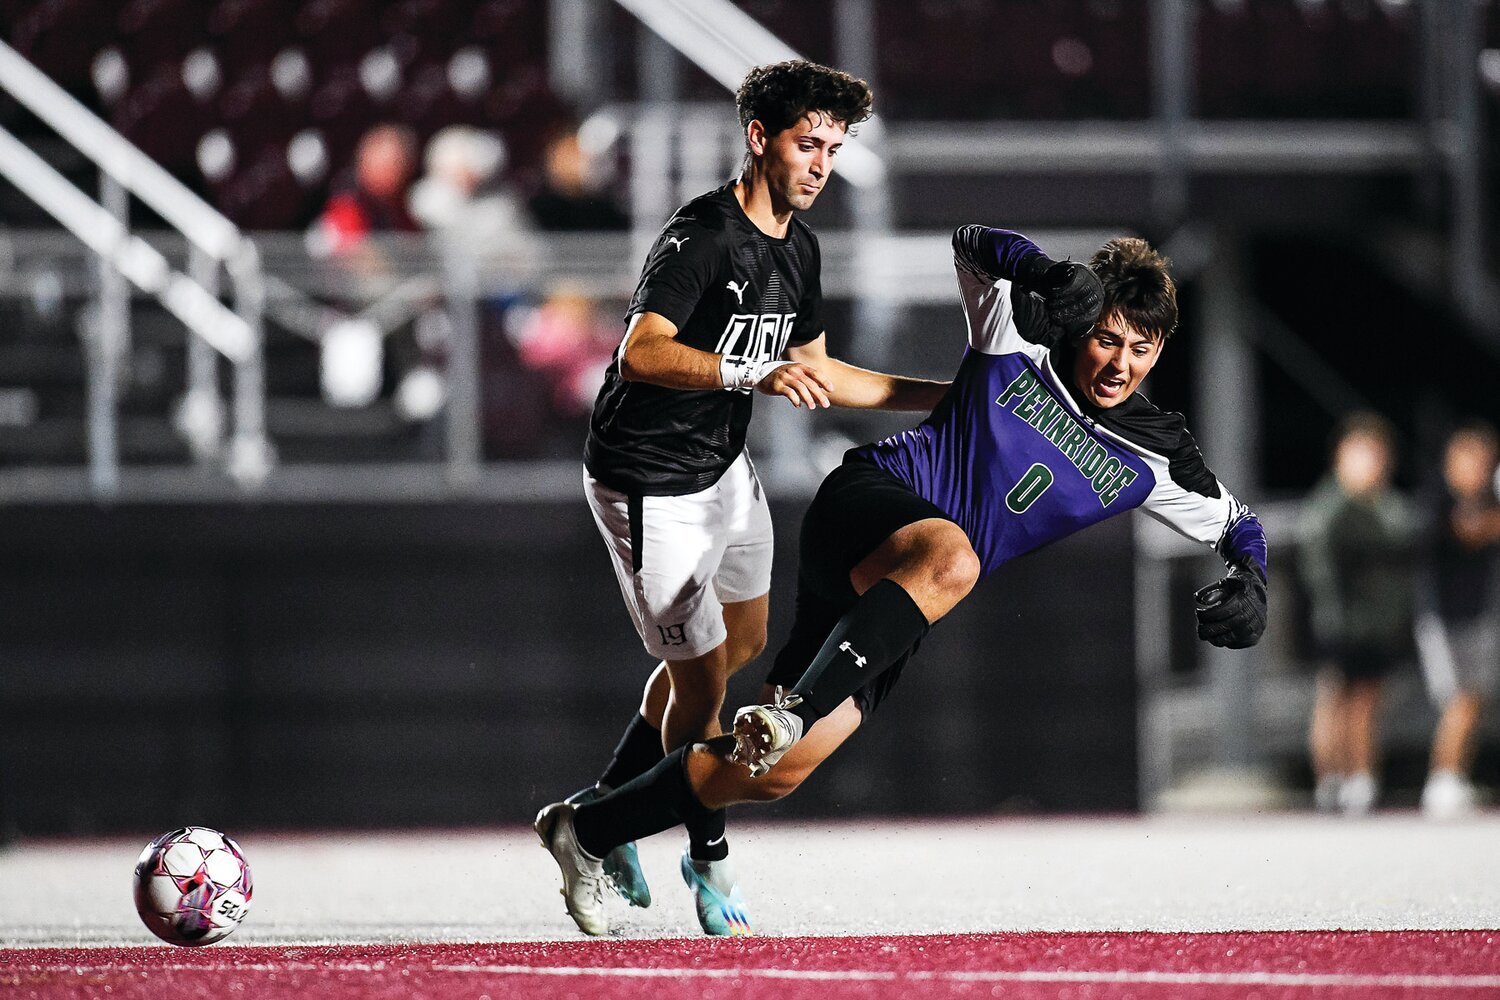 Faith Christian’s Jamie Ferrandis steals the ball from Pennridge goalie Gavin Dimmick in the first minutes of the game, leading to a goal by Logan Moore and a 1-0 lead.